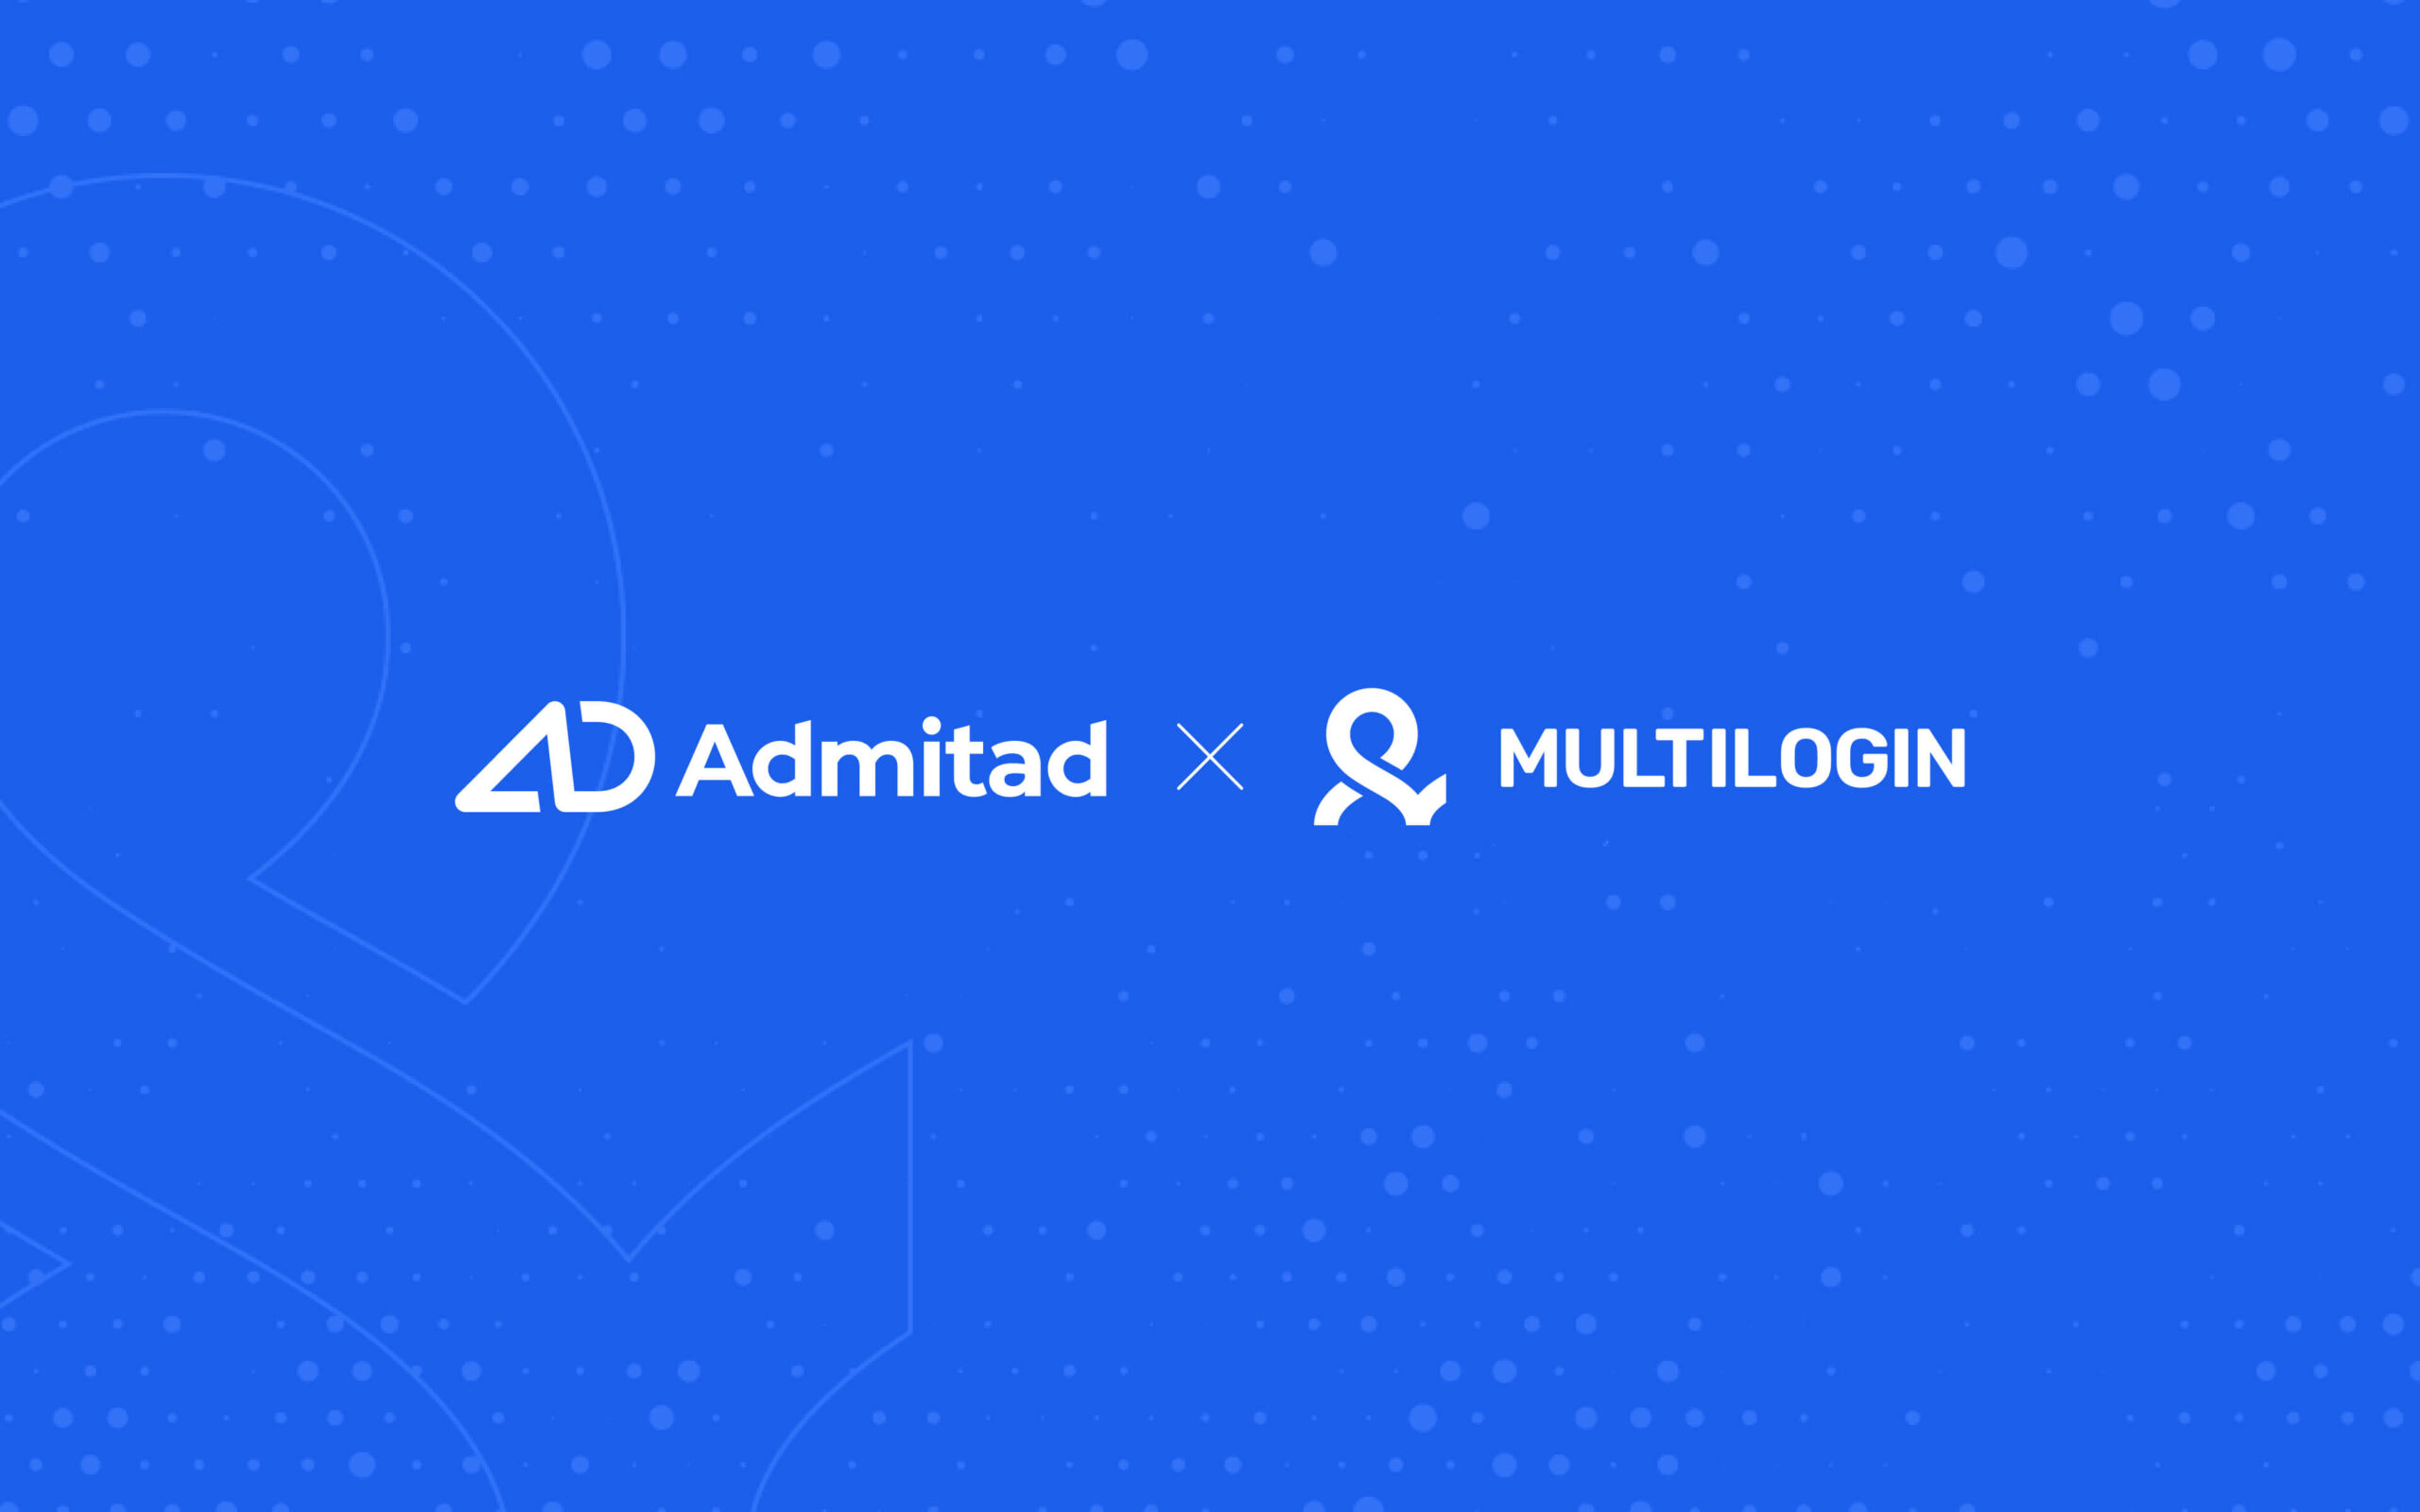 Admitad partners with Multilogin to provide multi-account management for affiliate publishers